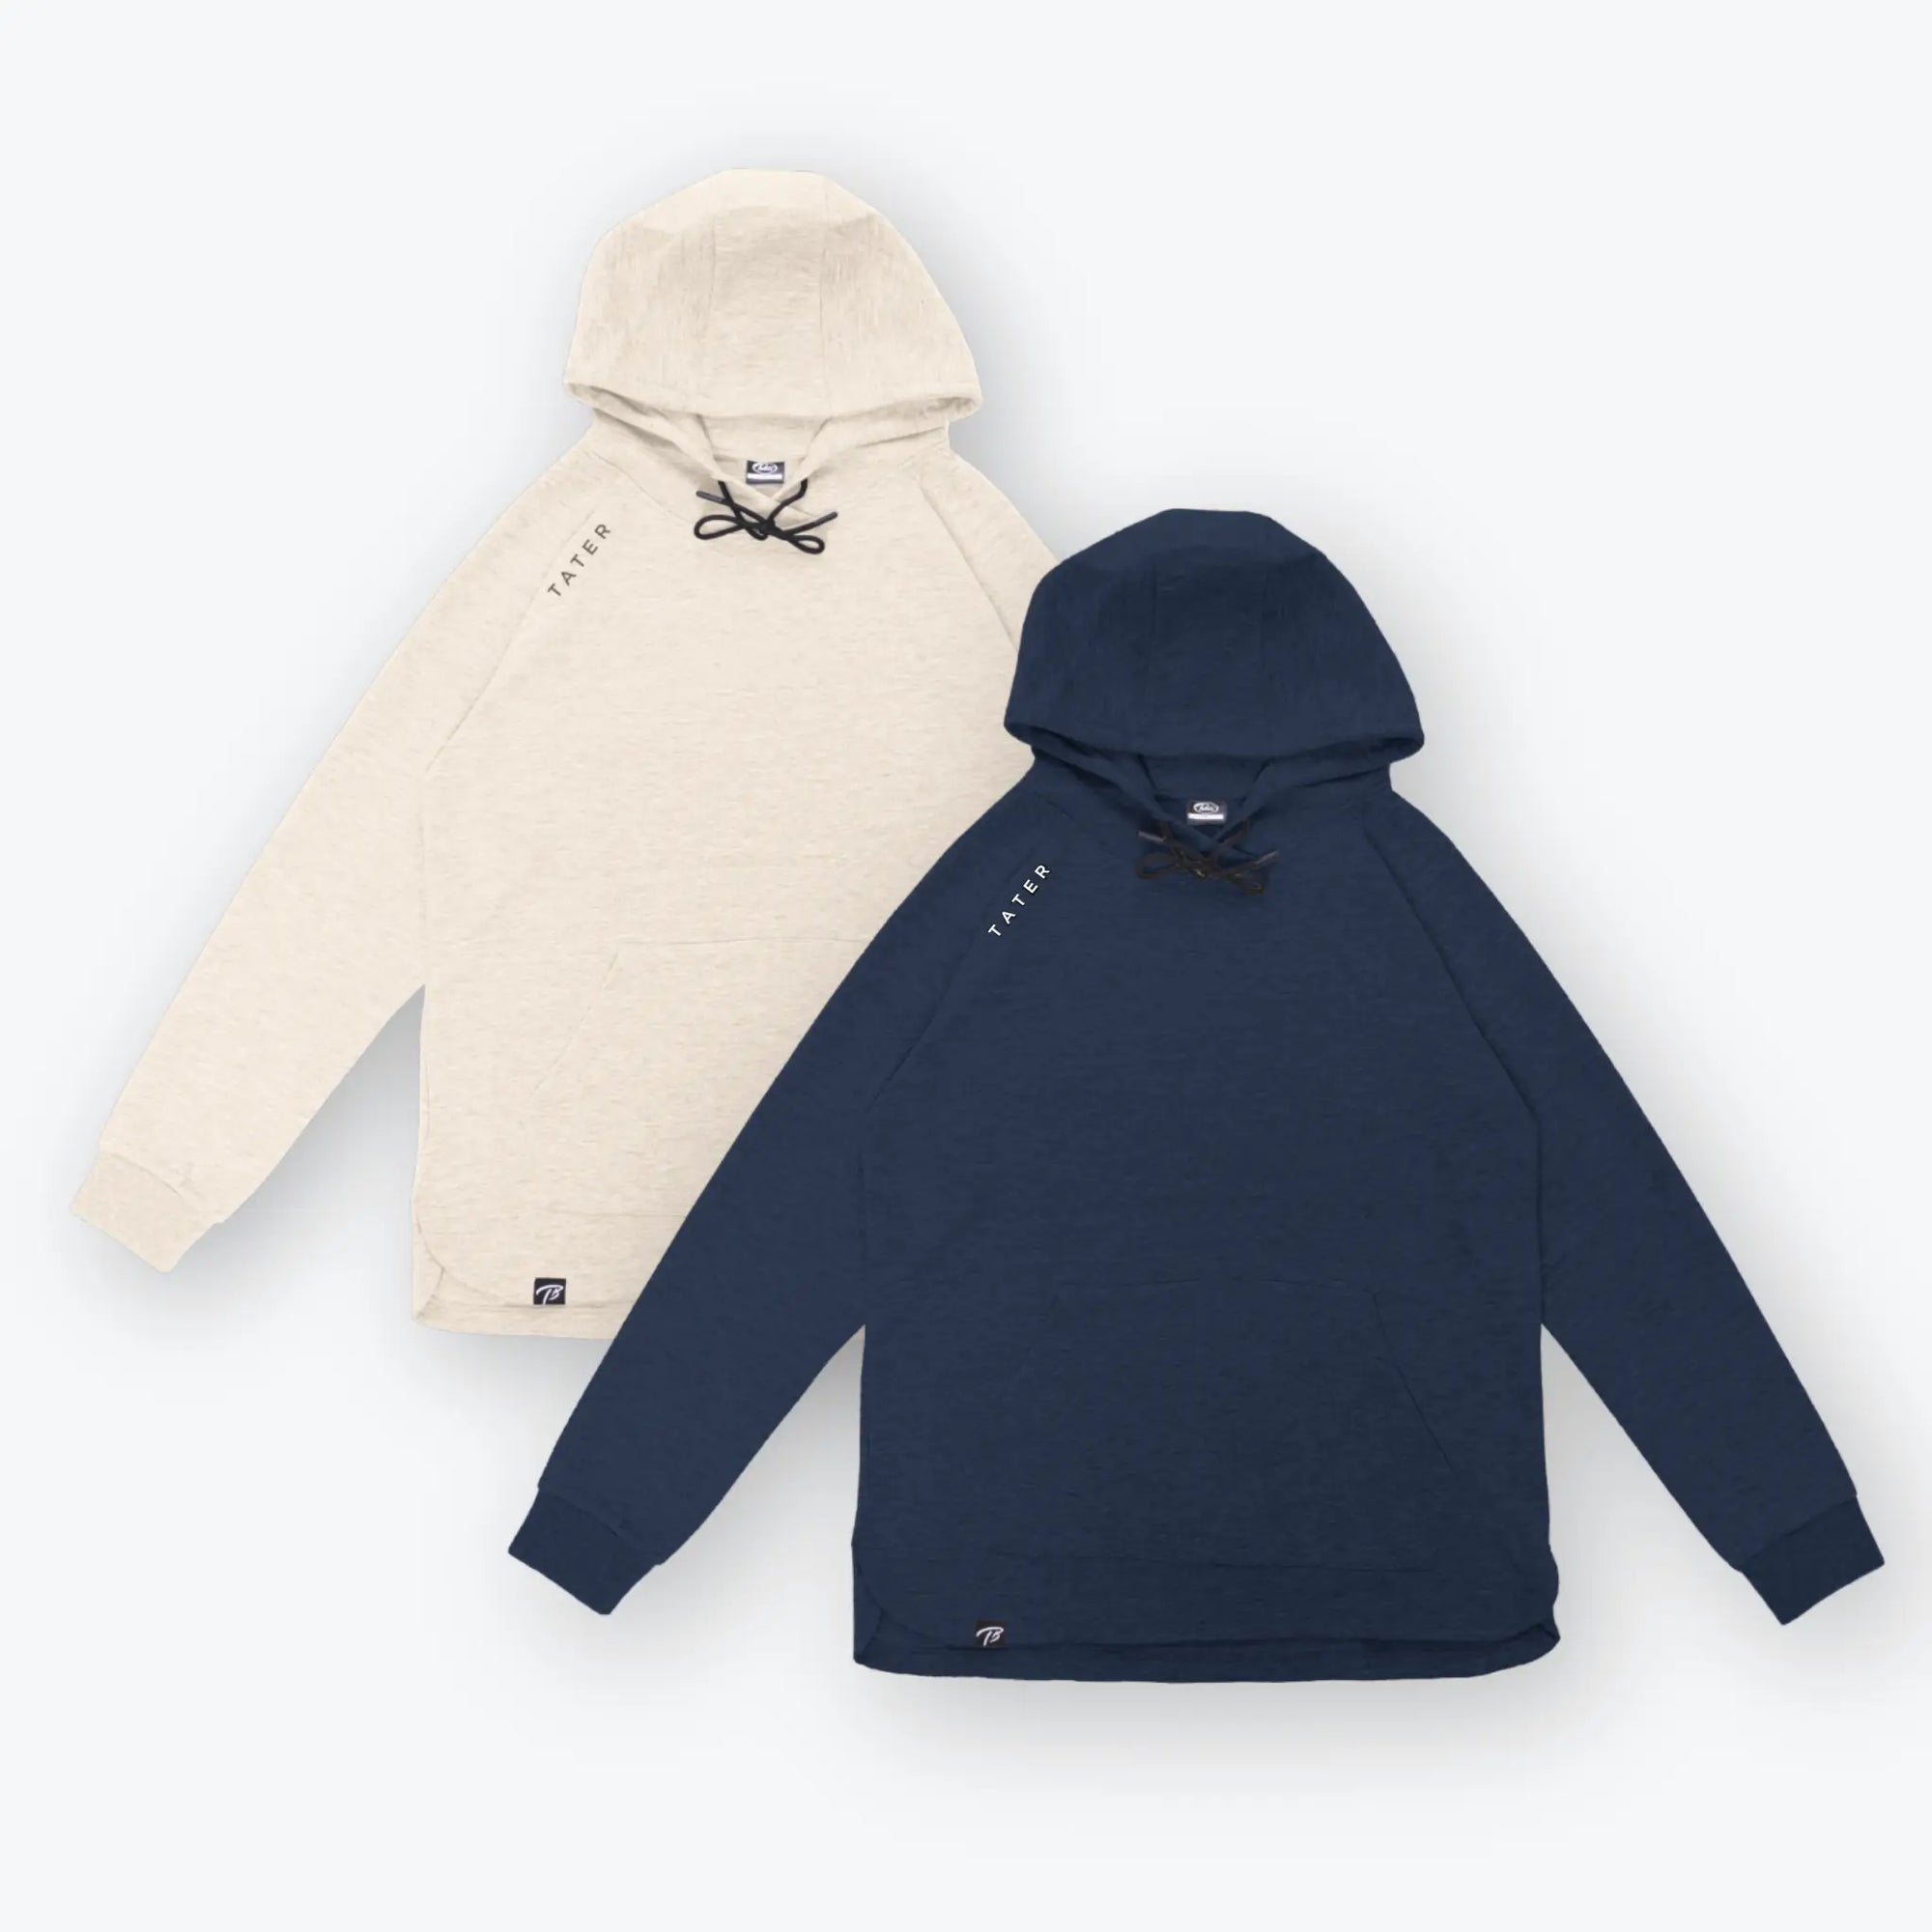 The image features two hoodies from Tater Baseball's Fundamentals collection. One hoodie is cream-colored, and the other is navy, both sporting the "TATER" logo on the left chest area. They present a minimalistic and clean design, suitable for a casual, athletic look.